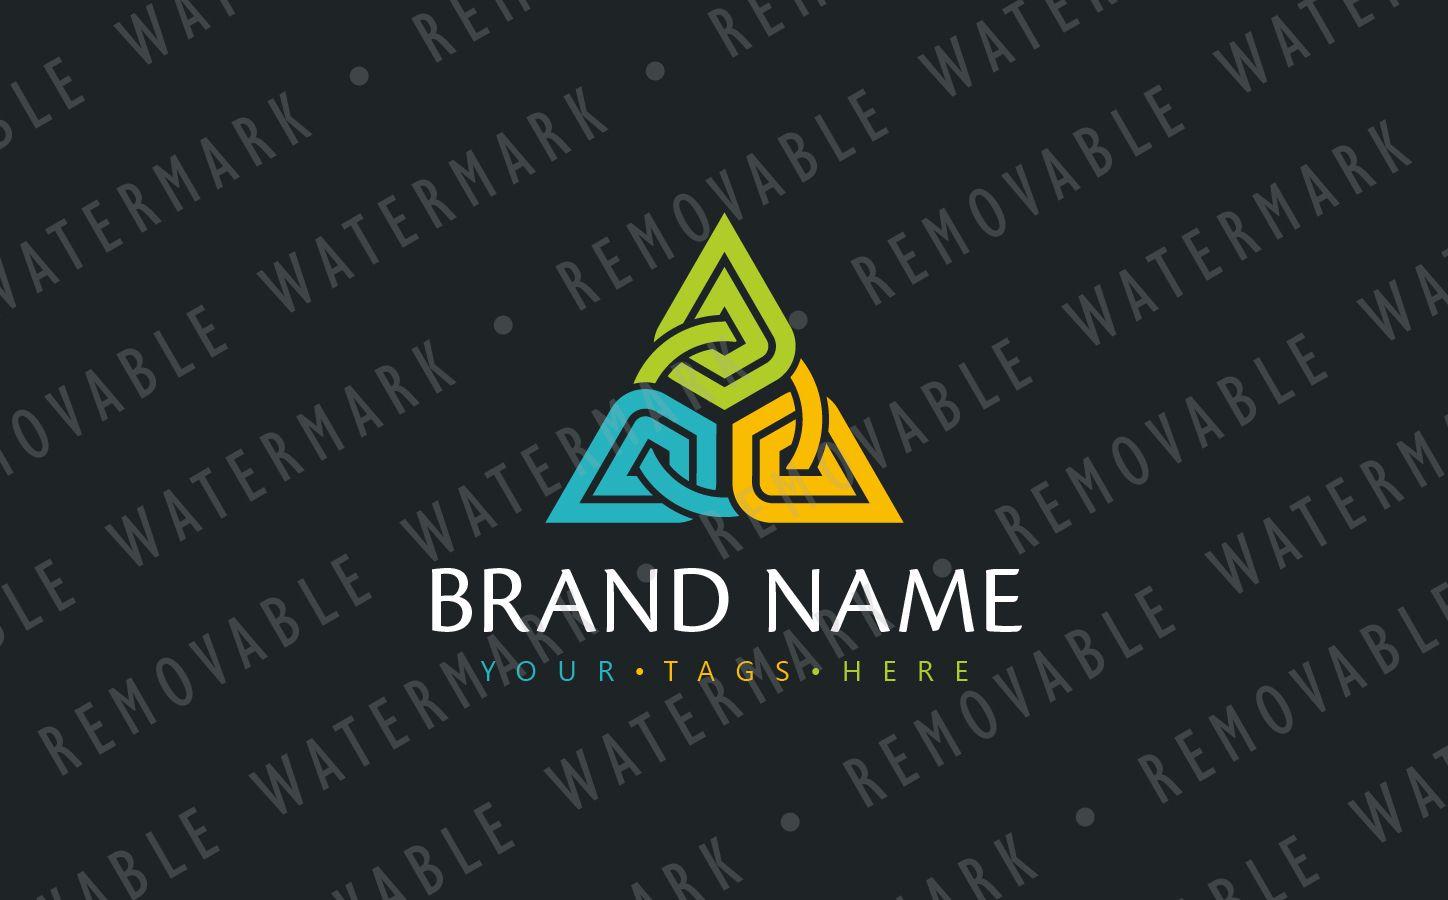 Gray Triangle Logo - Abstract Chained Triangle Logo Template #76579